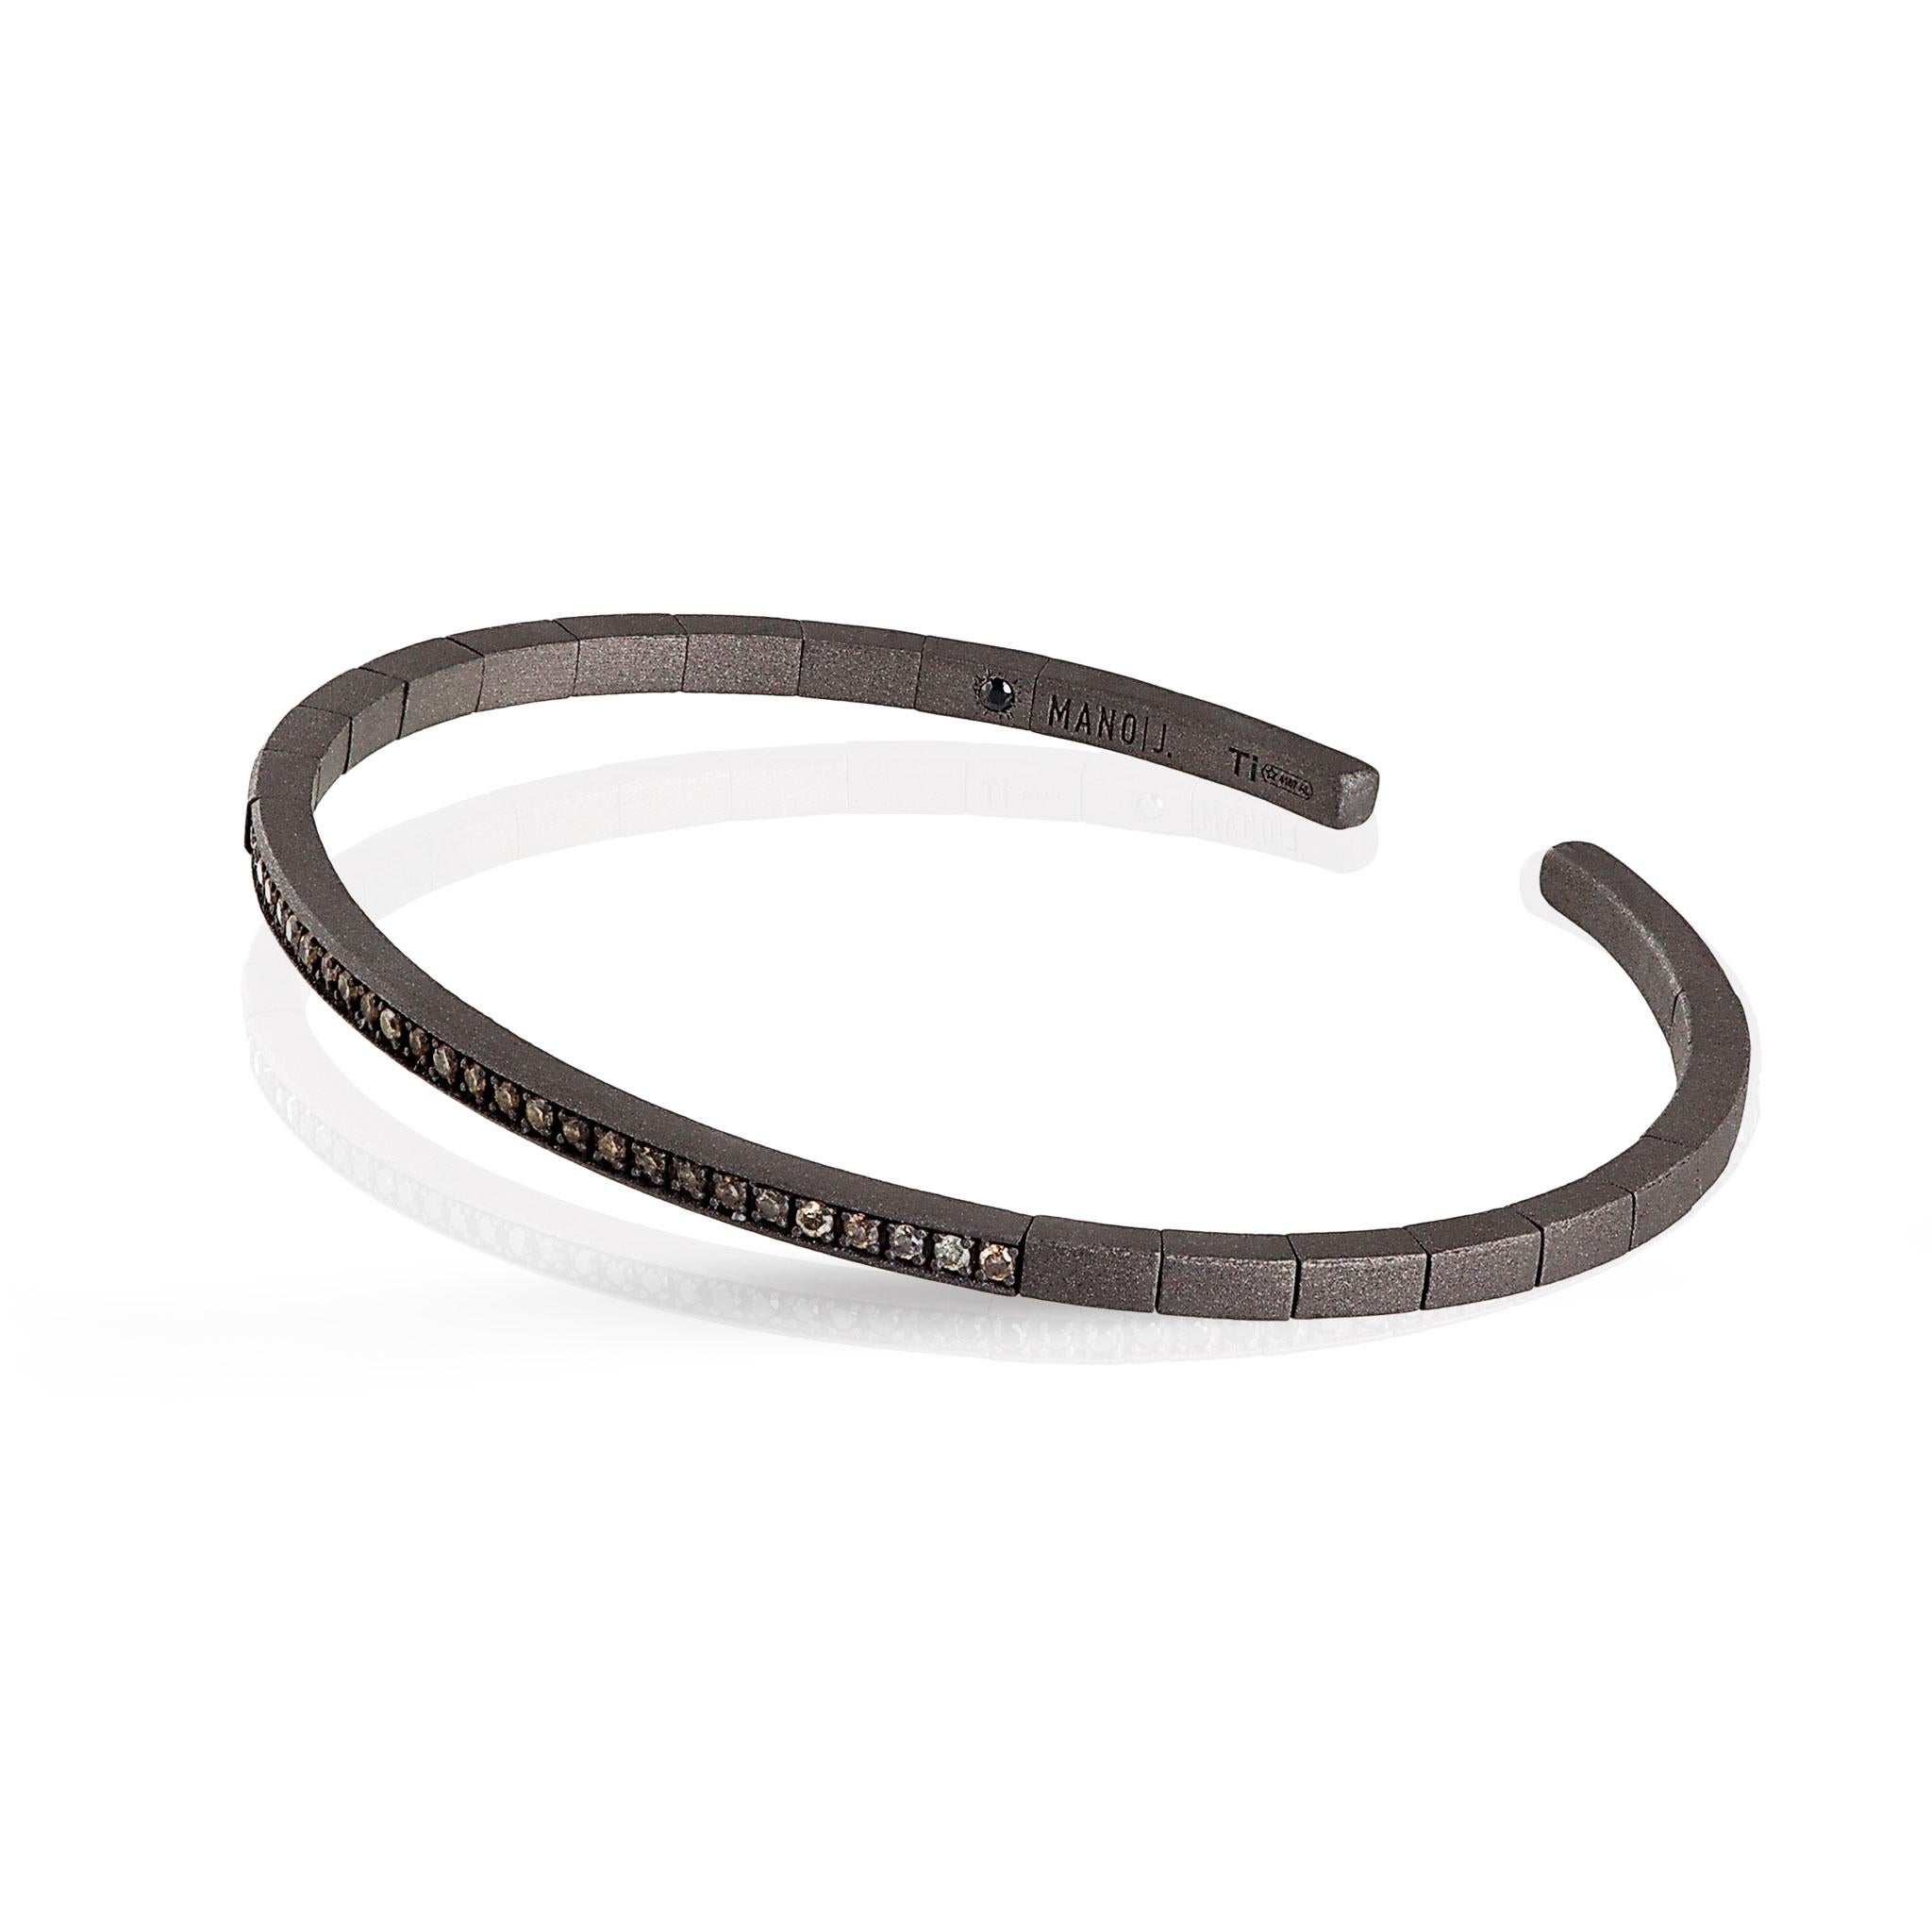 Men's titanium bracelet with brown diamonds. A bracelet with an elastic structure featuring a long series of 27 brown diamonds with a total carat of 27 points running through part of the bracelet. On the inside, a 1-point black diamond has been set